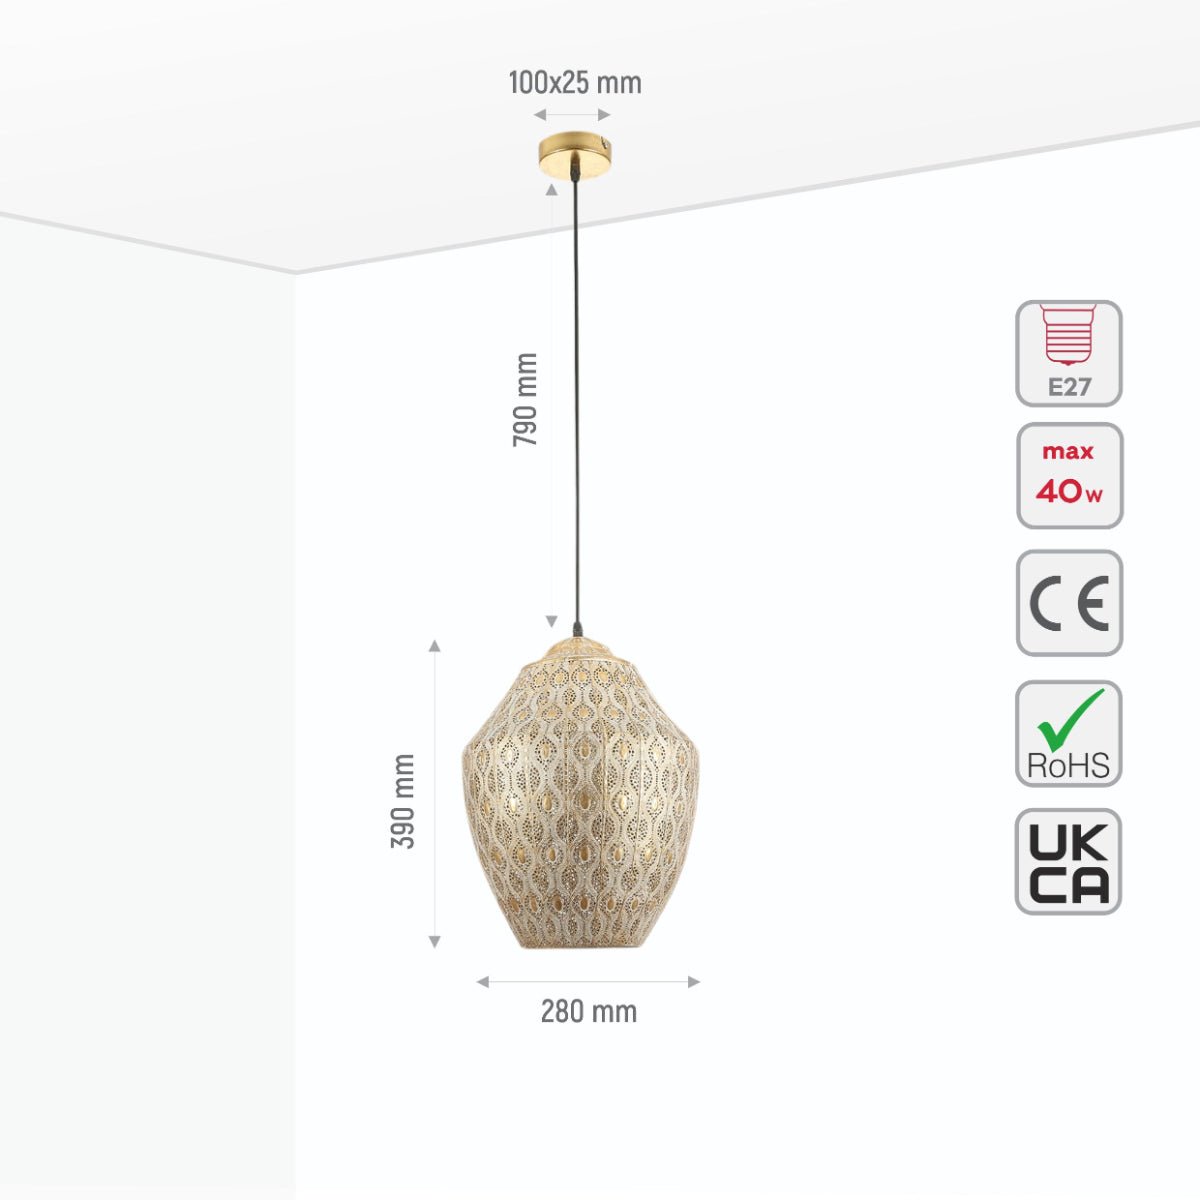 Size and specs of Antique Brass Metal Step Pendant Ceiling Light with E27 | TEKLED 150-18053